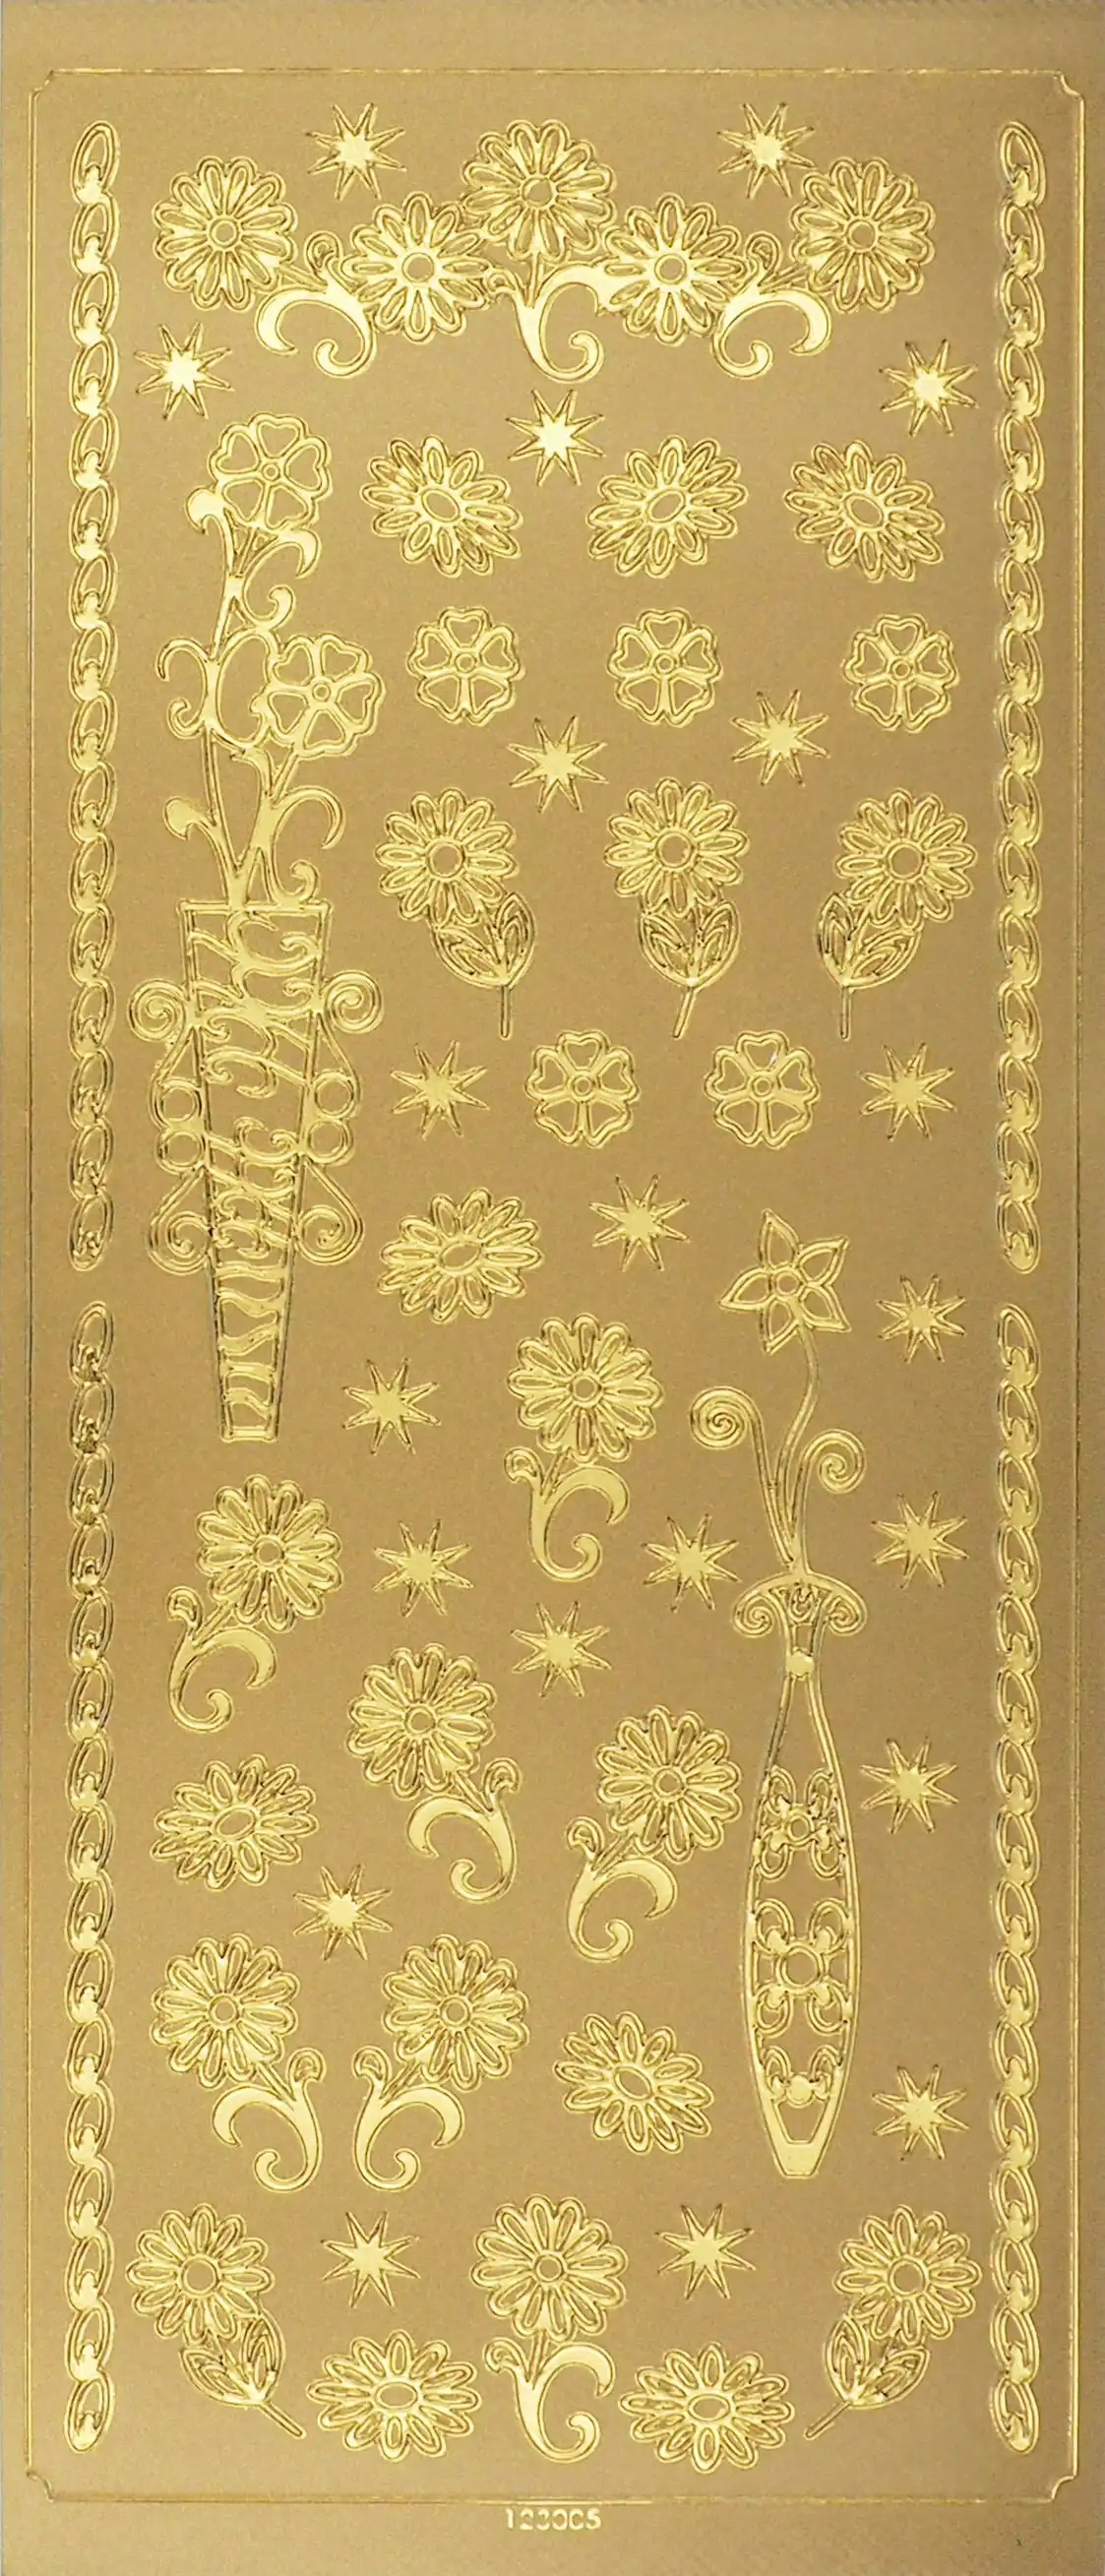 Arbee Foil Stickers Border Flowers, Gold